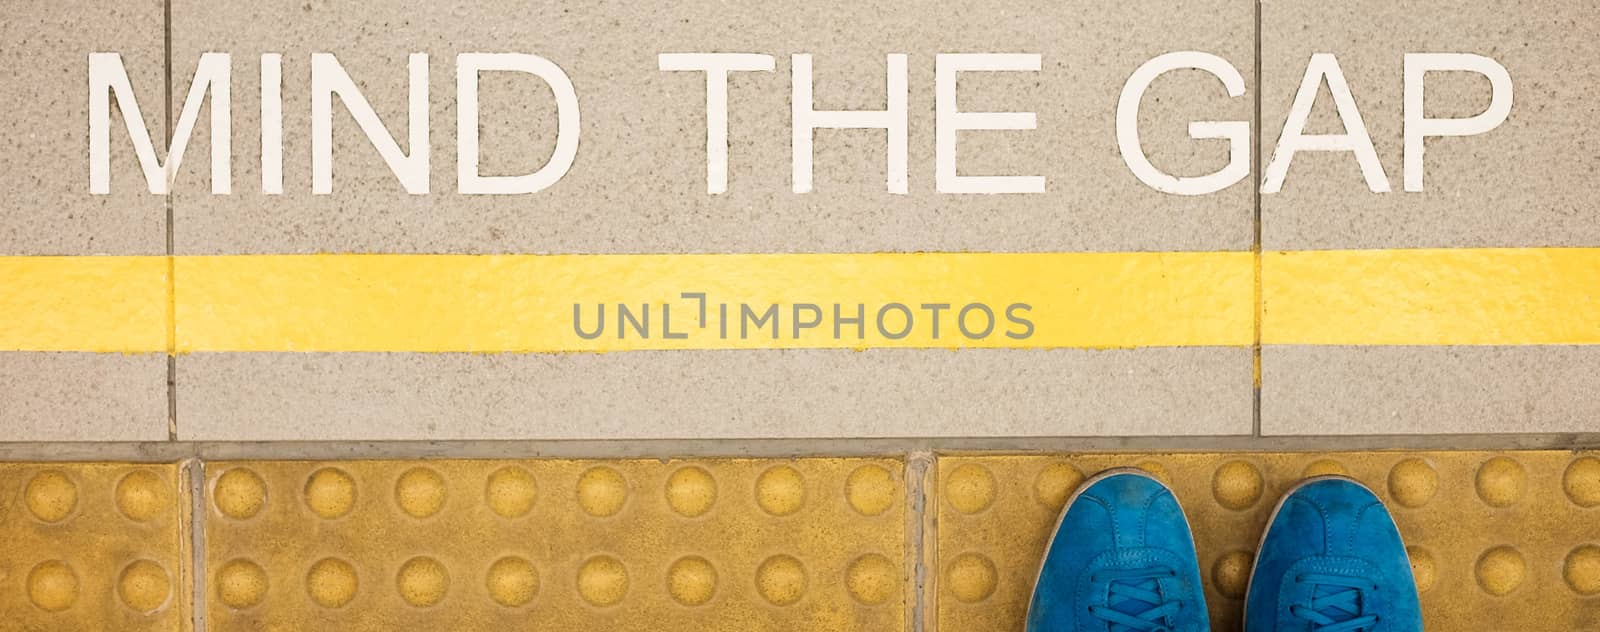 The sign " Mind the gap " painted on train station's platform edge by beer5020